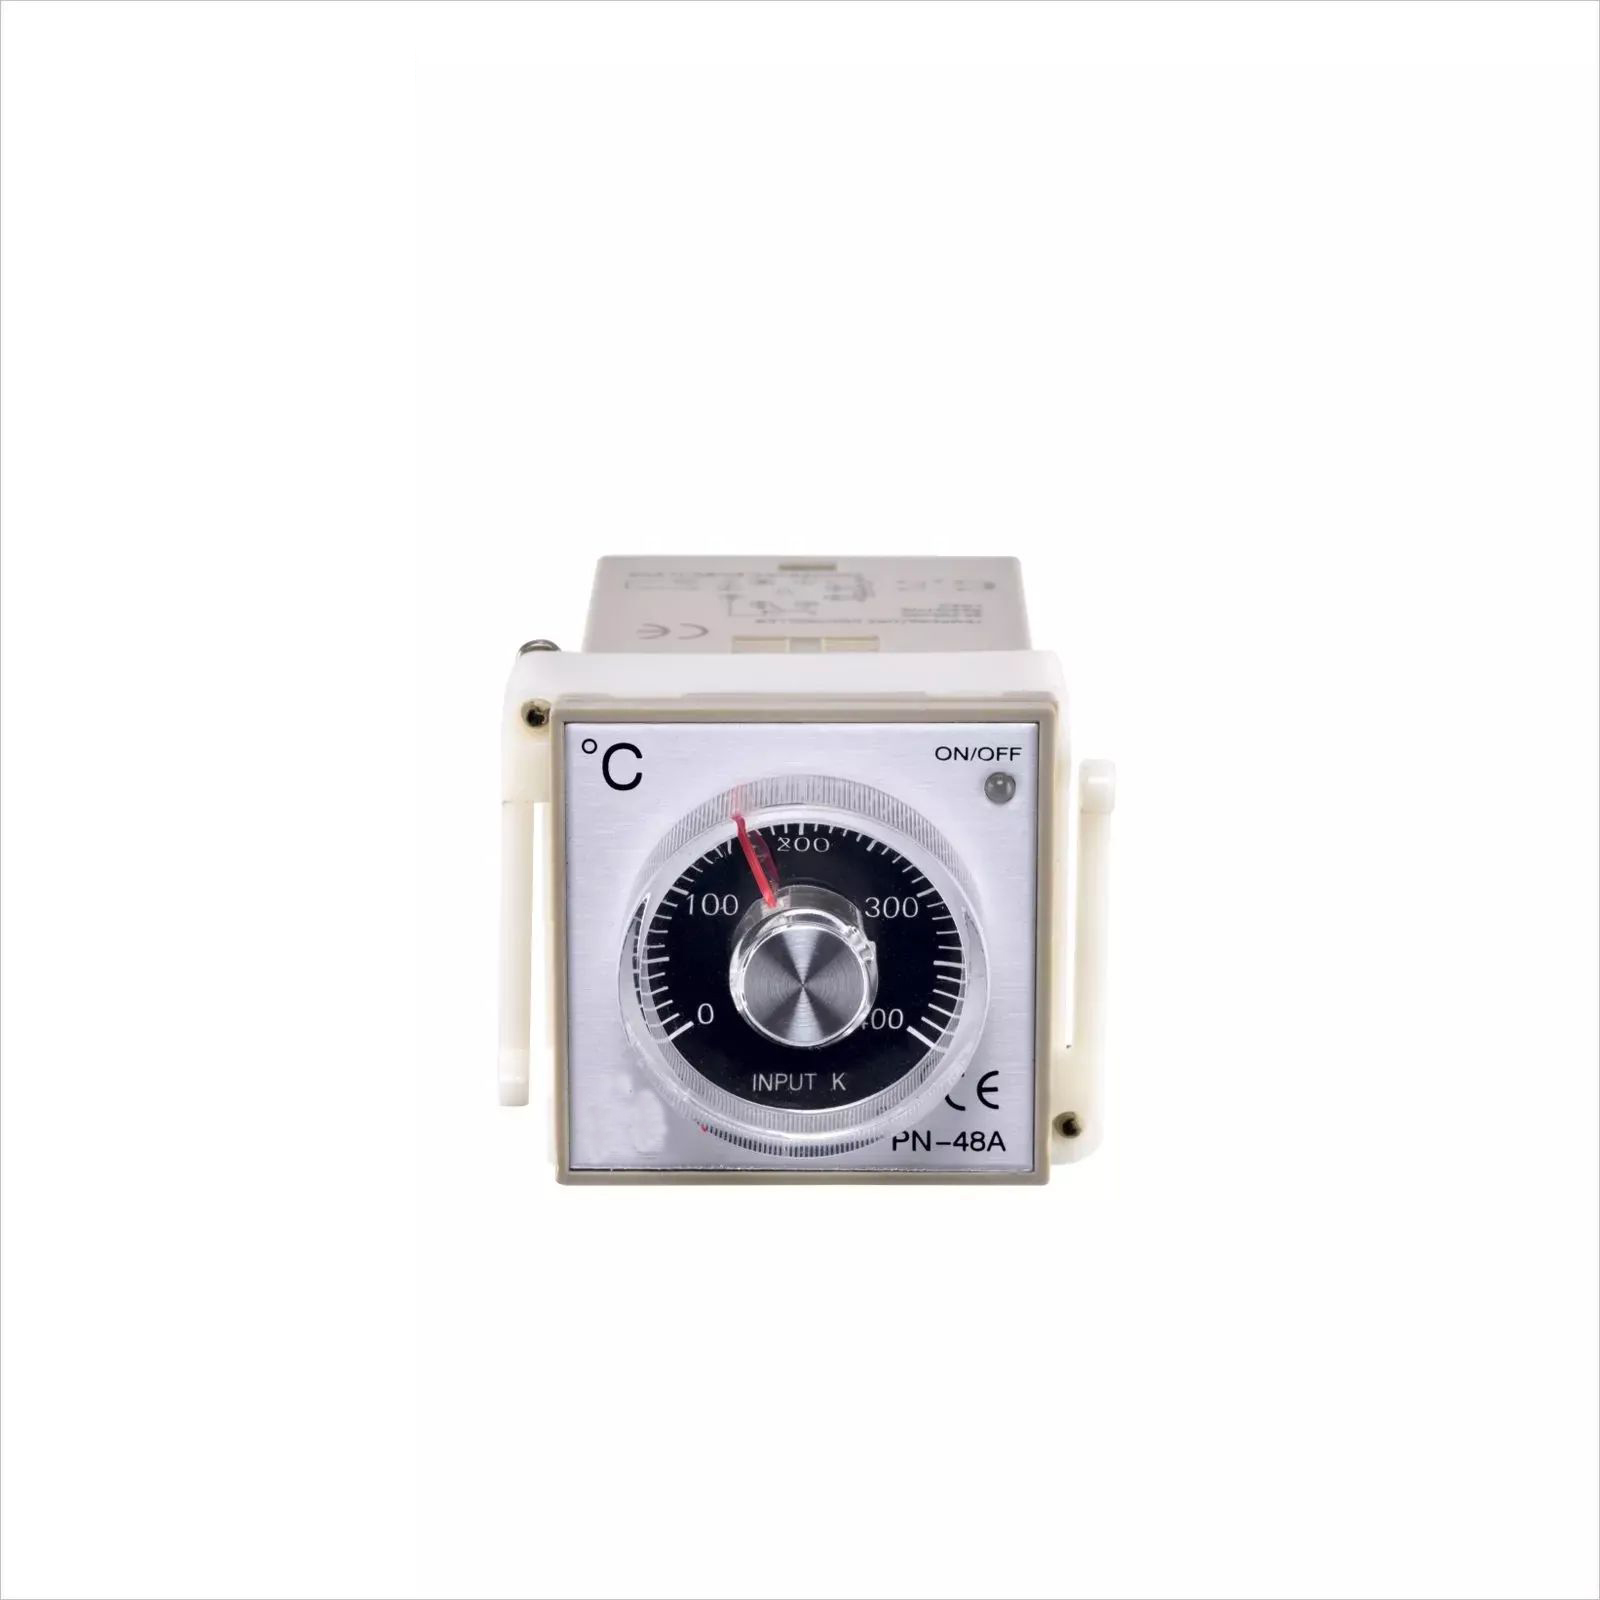 PN-48A mini size Analog panel Temperature meter with knob